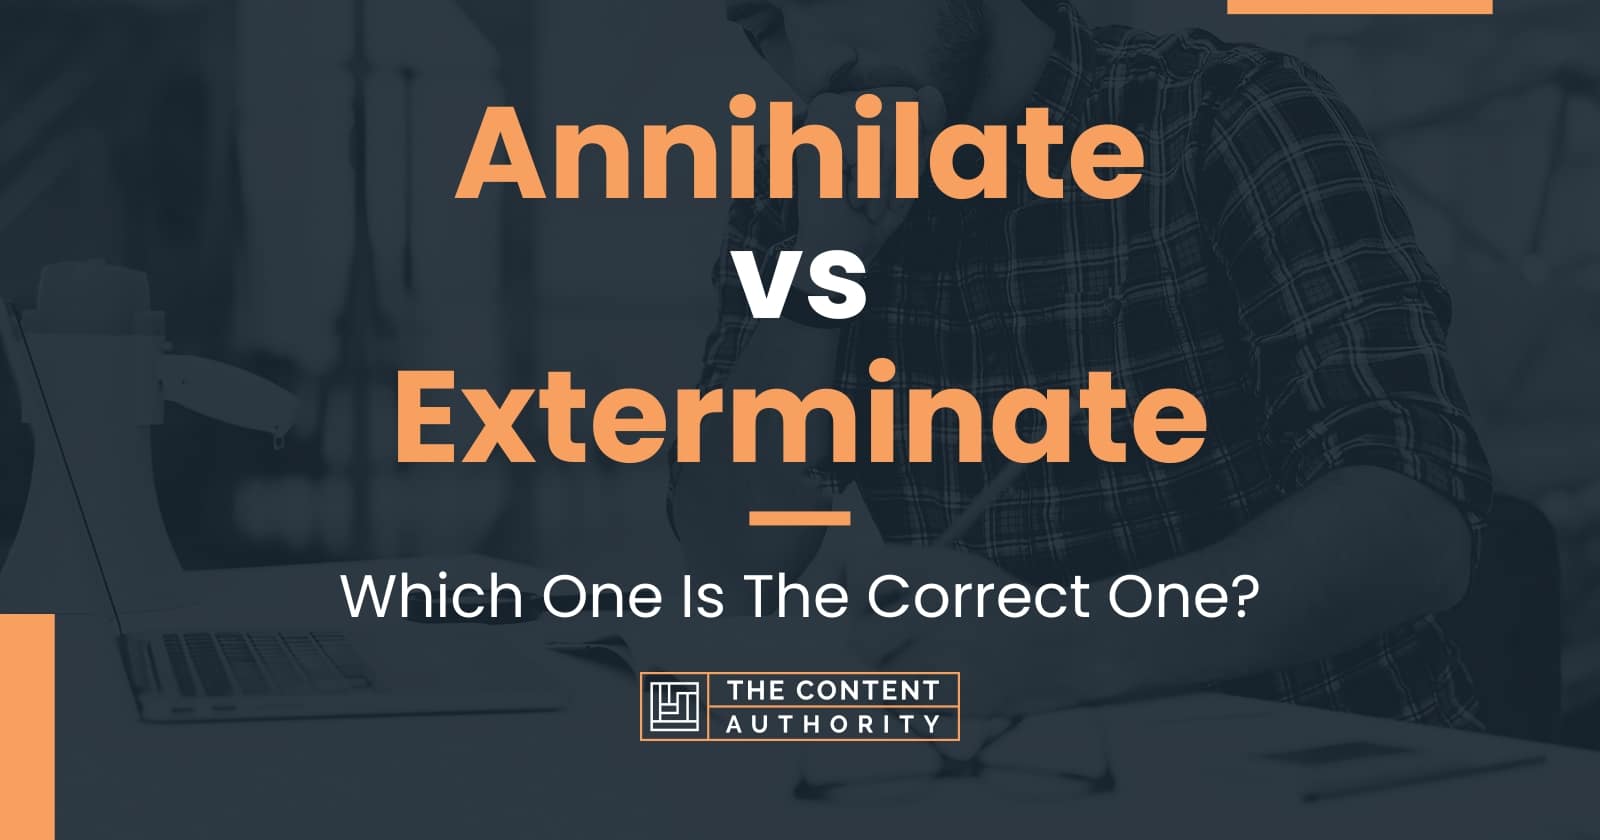 Annihilate vs Exterminate: Which One Is The Correct One?